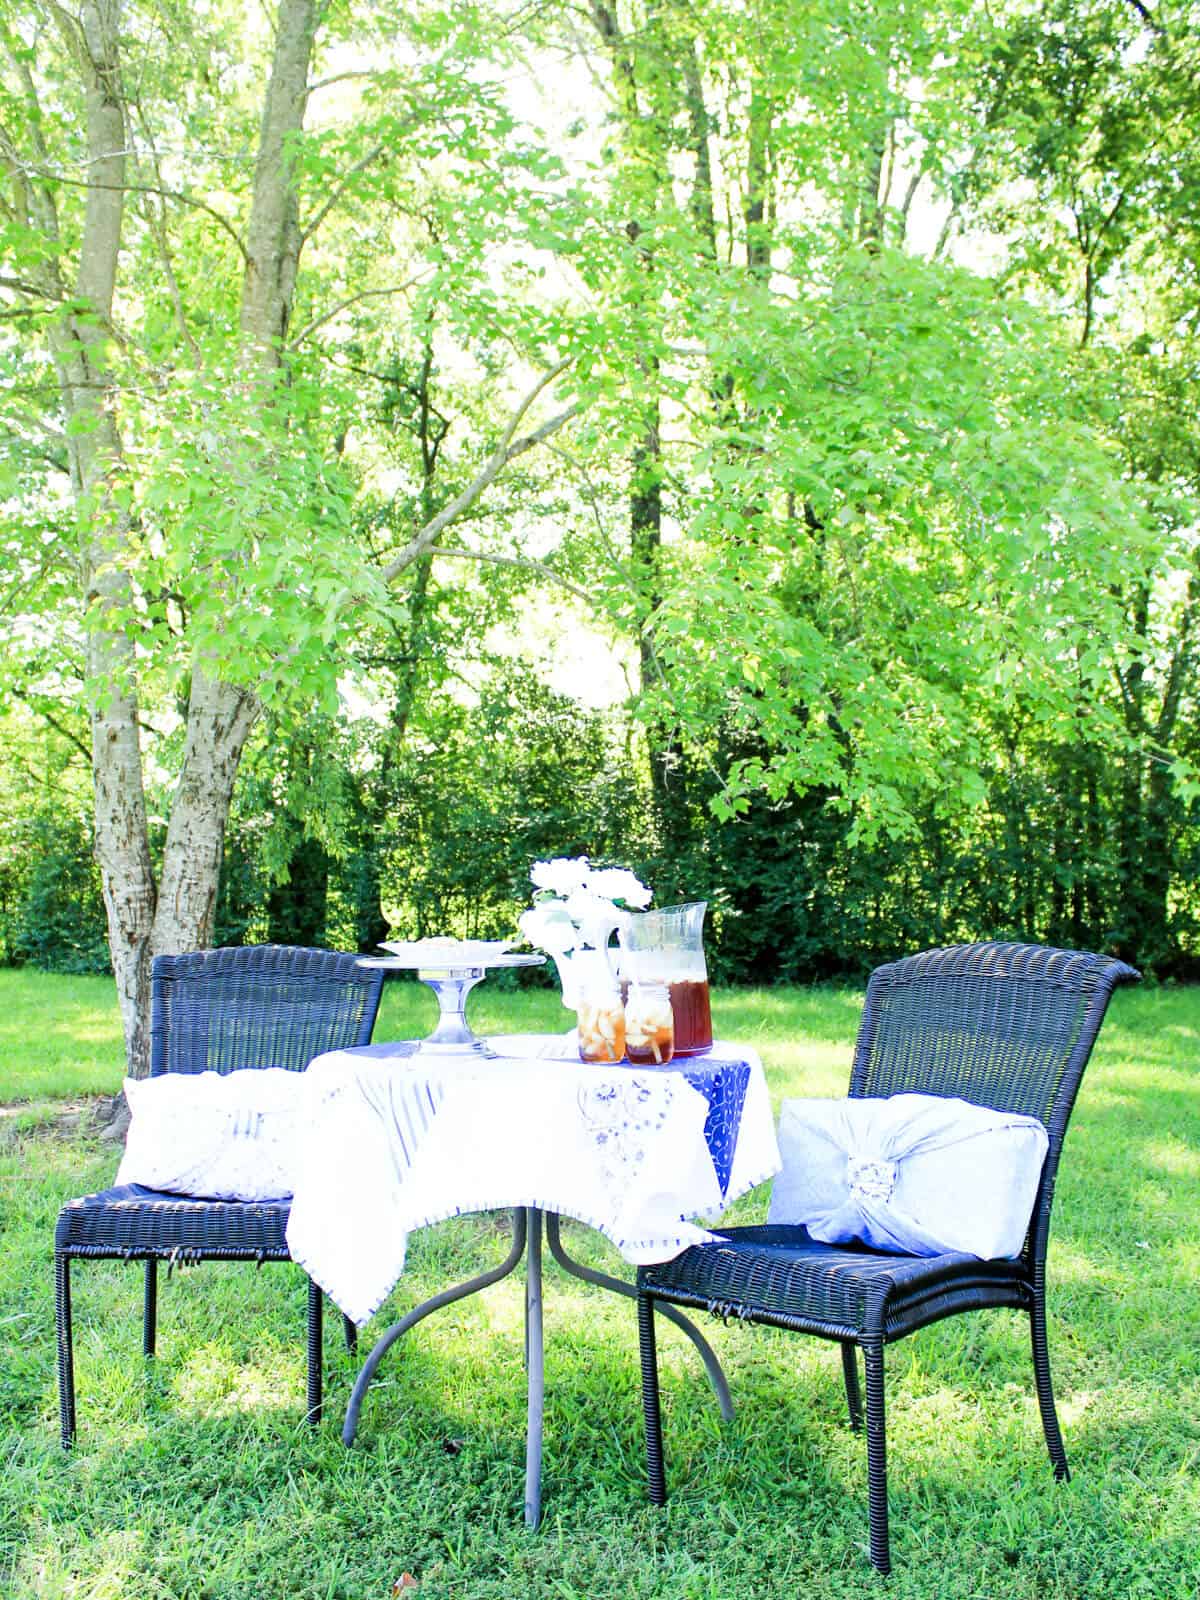 outdoor table with blue tablecloth with a pitcher of sweet tea with 2 full glasses